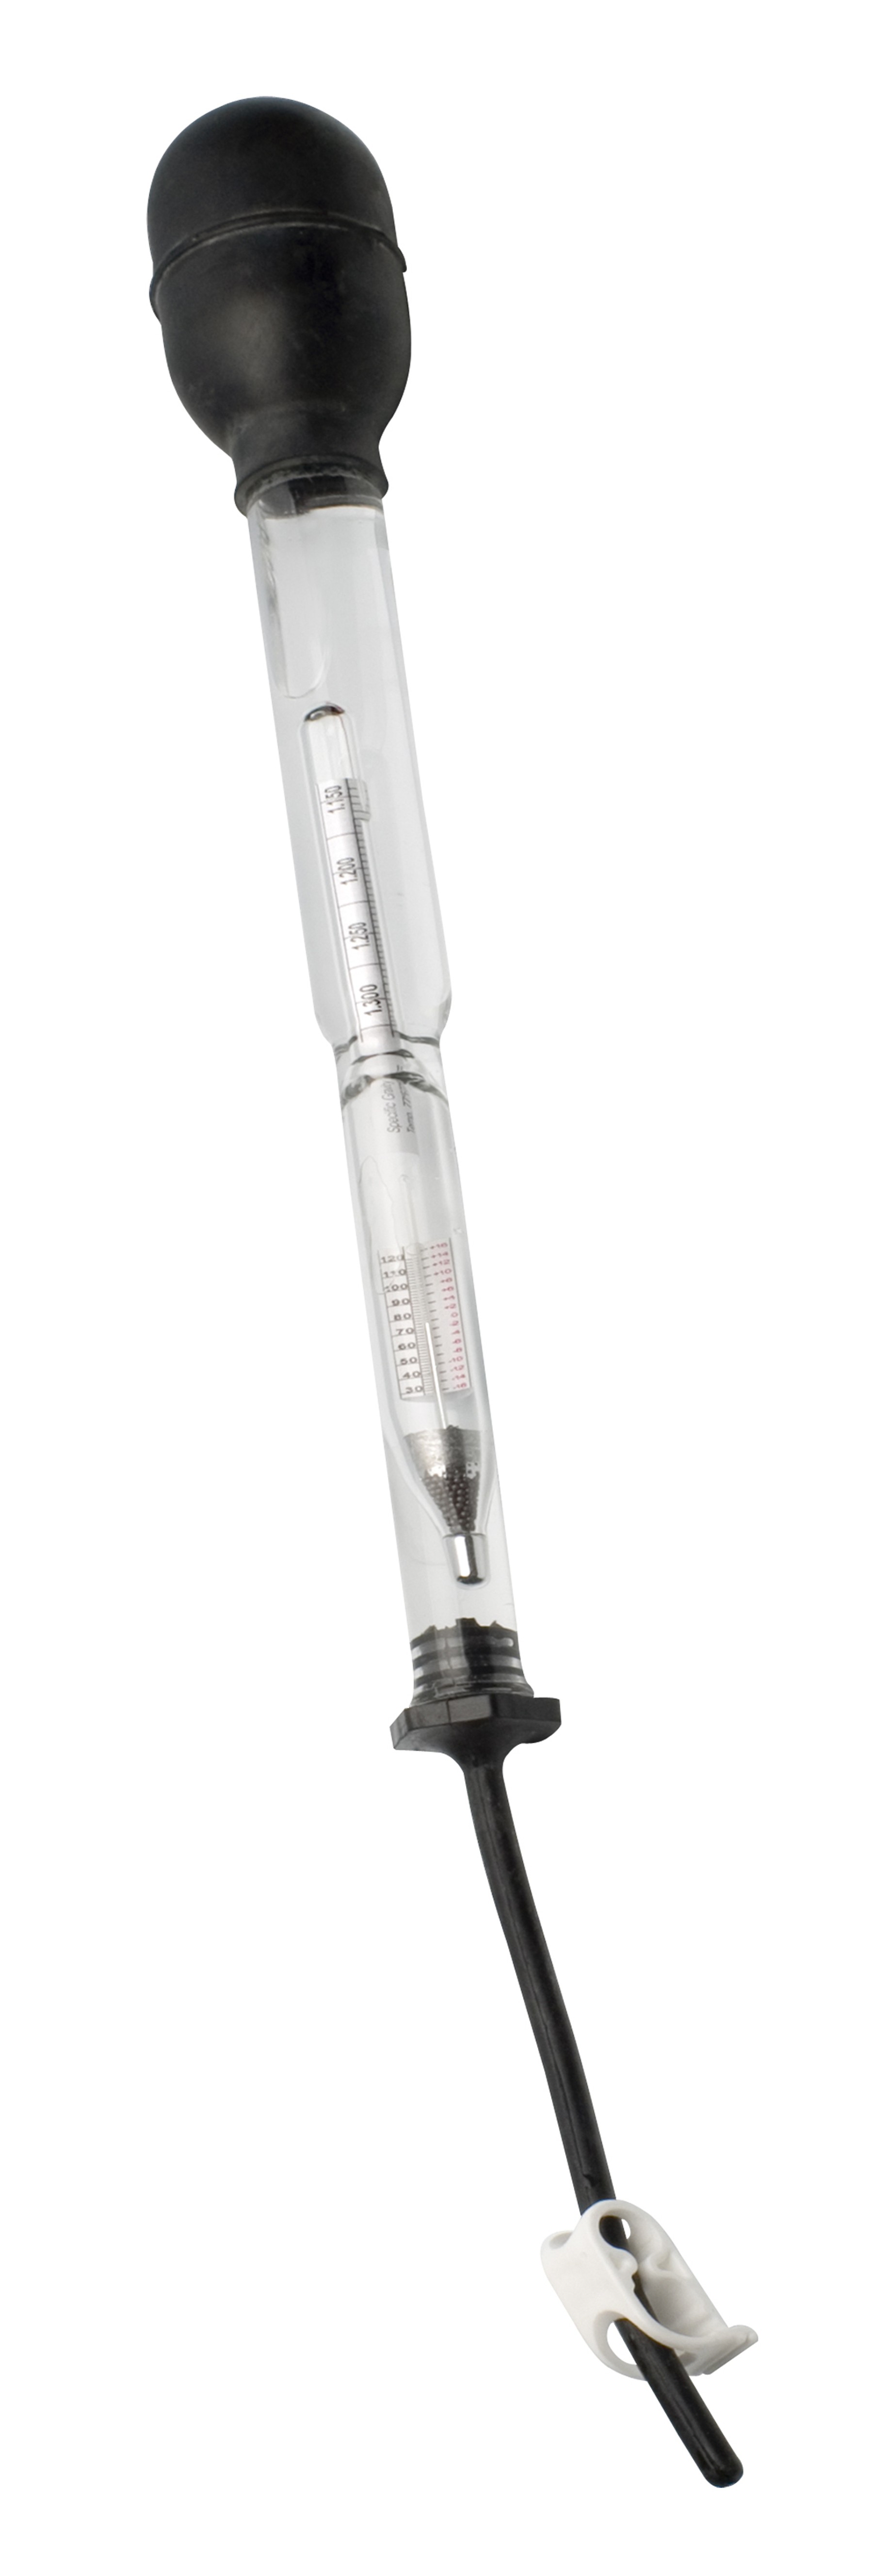 H-B DURAC Battery Hydrometer with Siphon Set; Traceable to NIST